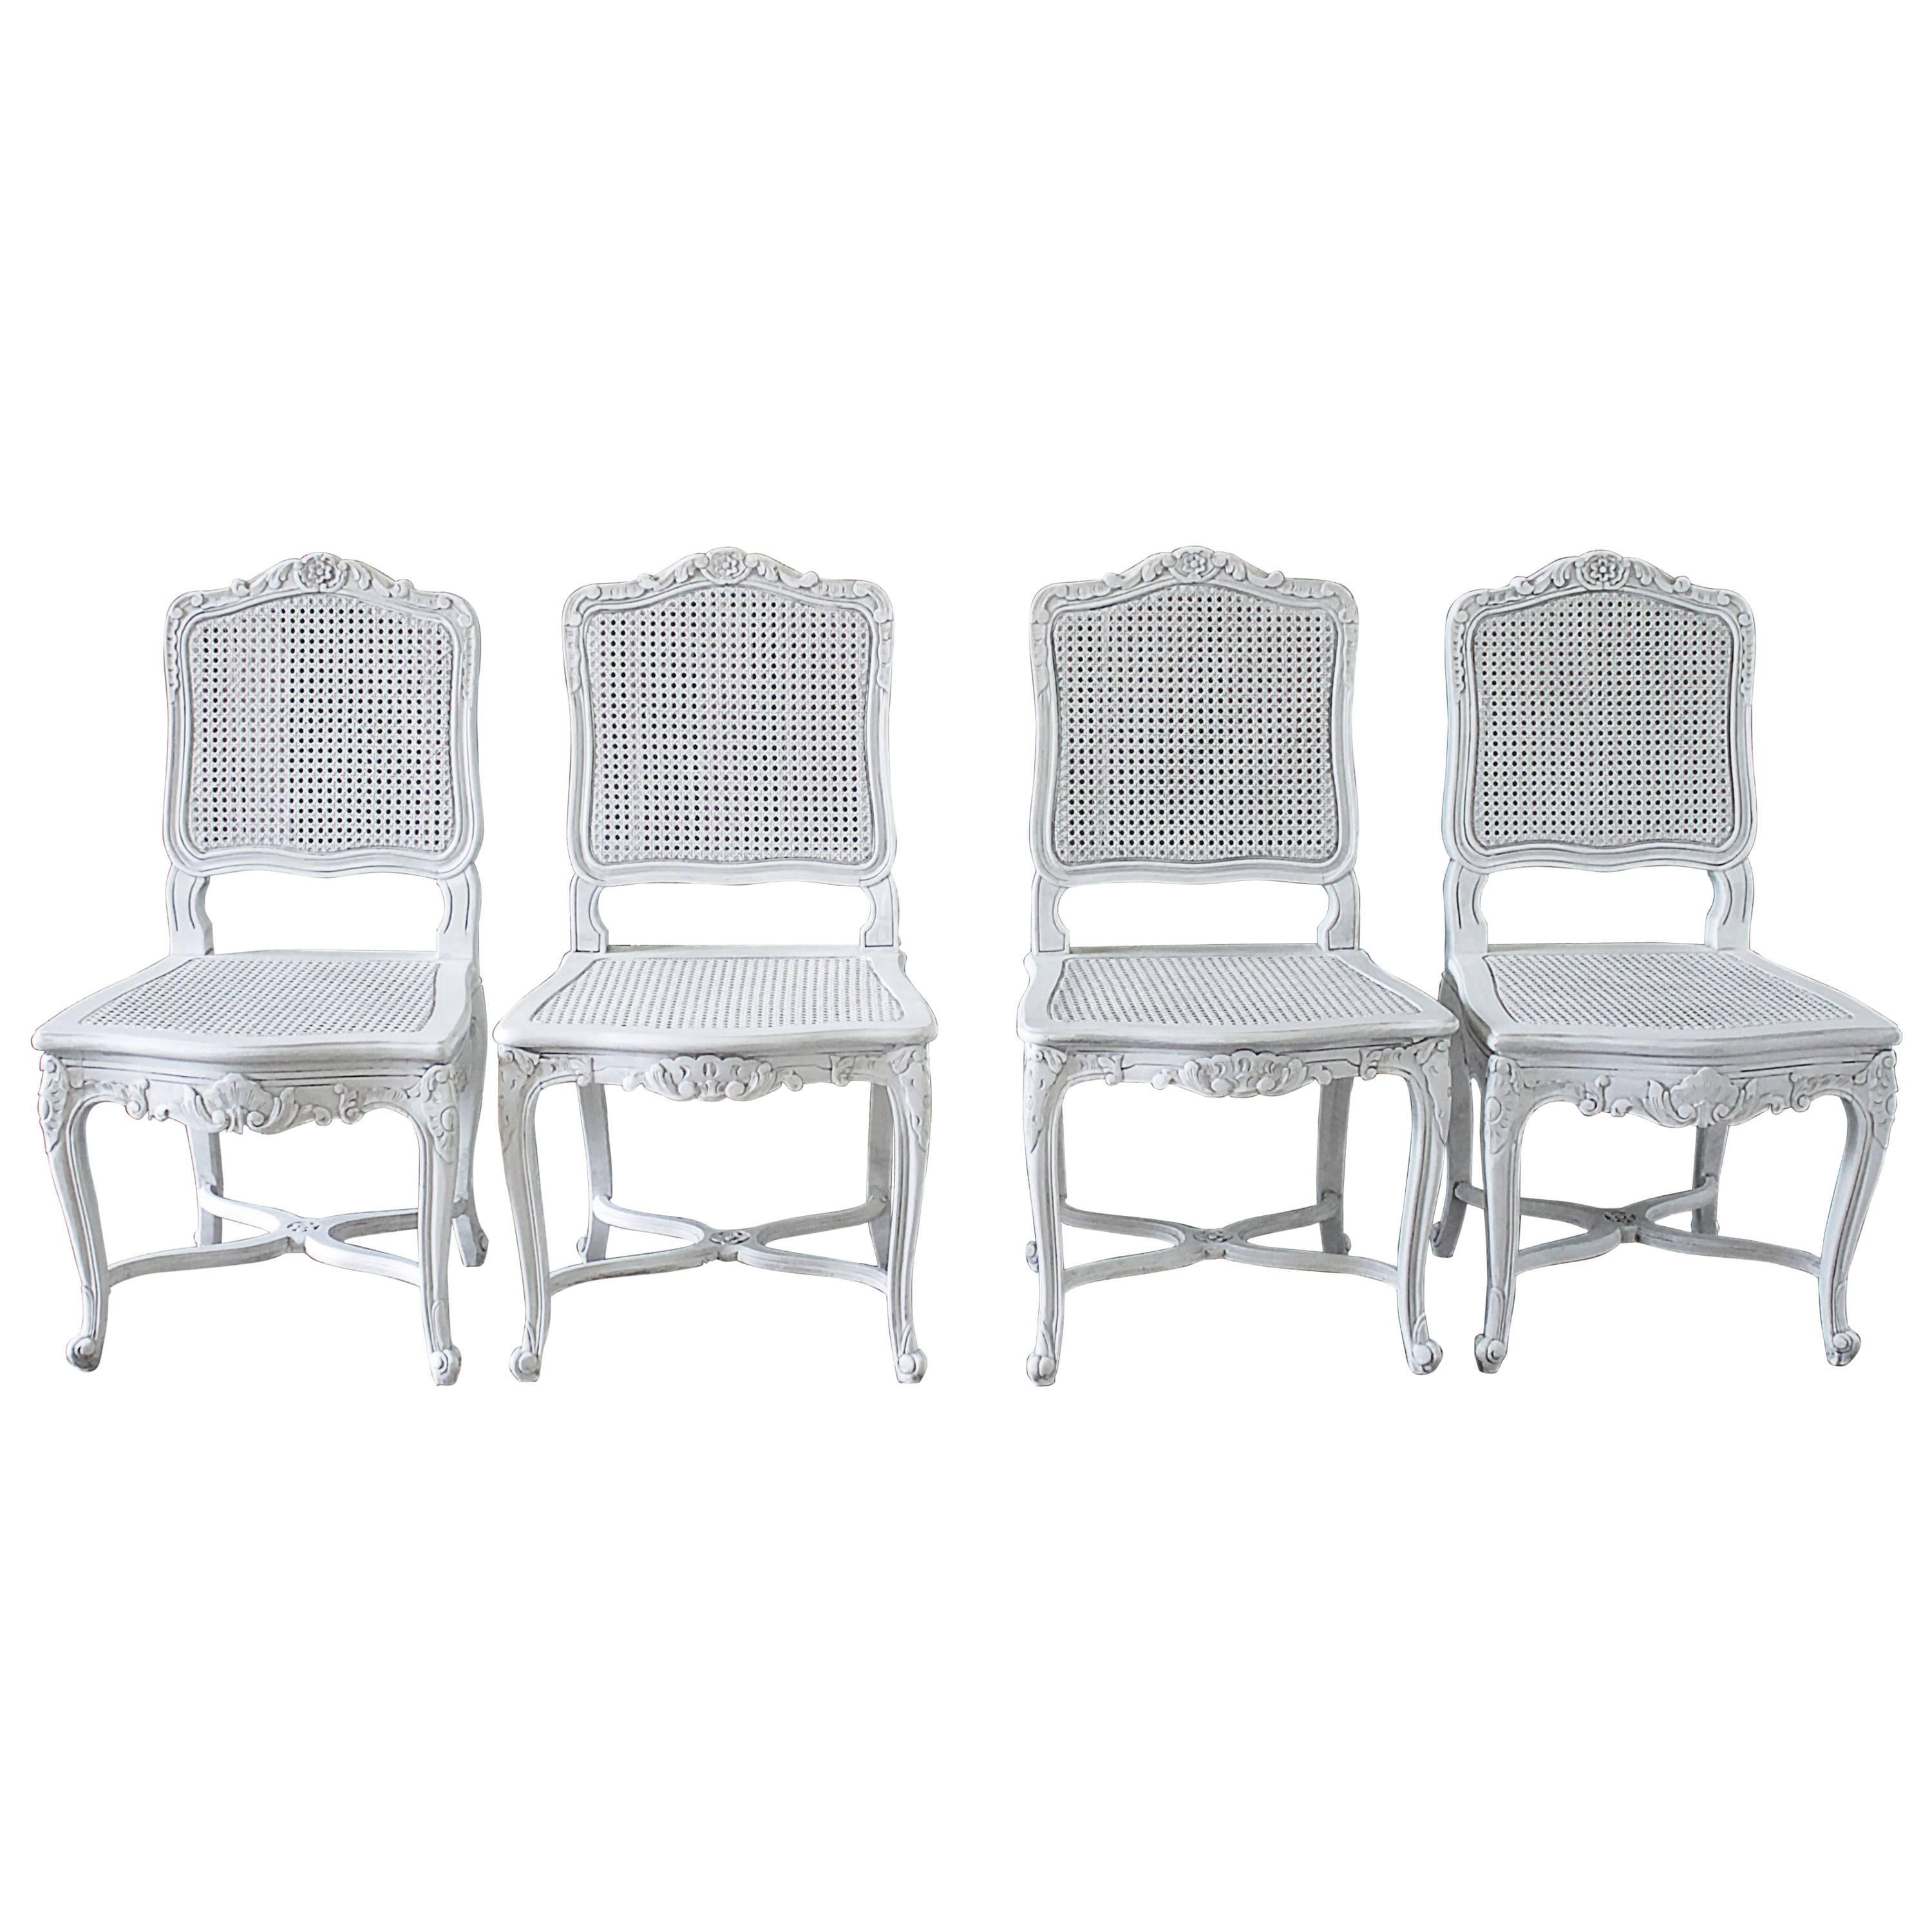 Seat of Four Antique French Country Style Cane Back Dining Chairs